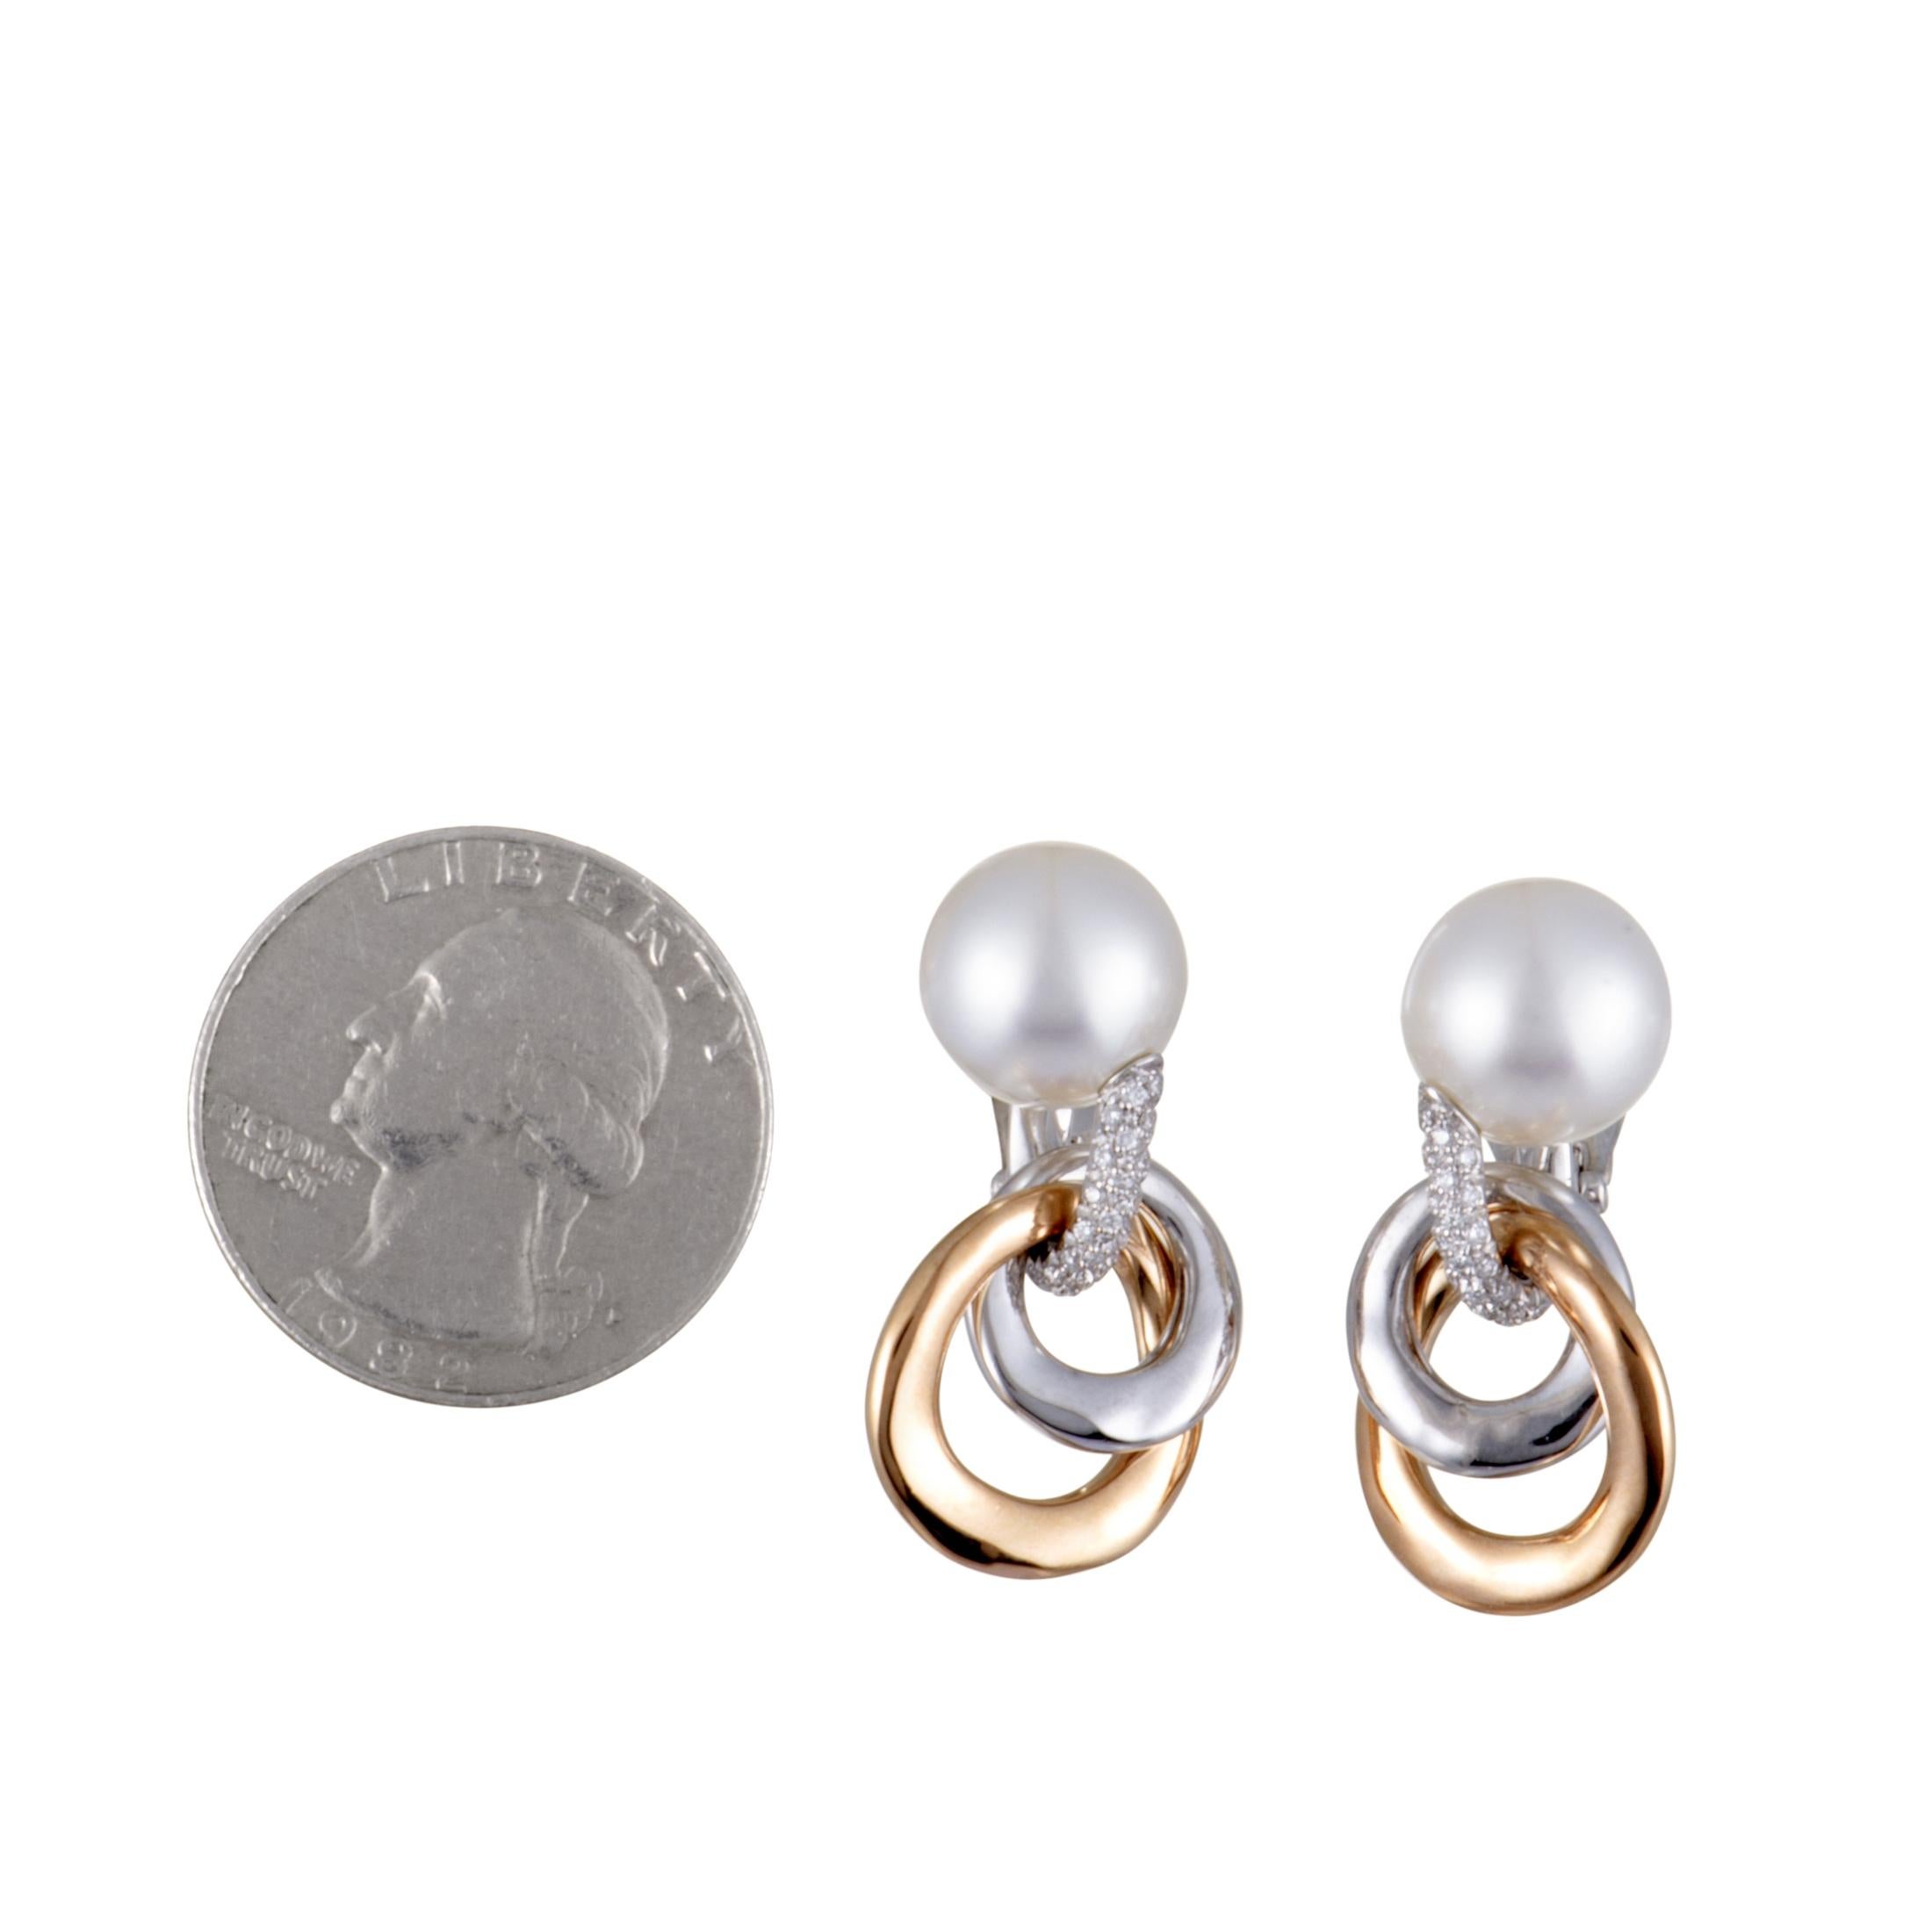 The sublime rose gold gives an attractive touch of radiant allure to these delightful earrings that boast a stunningly feminine appeal thanks to the charming design and lustrous décor. The pair is created by Mikimoto and it is masterfully crafted